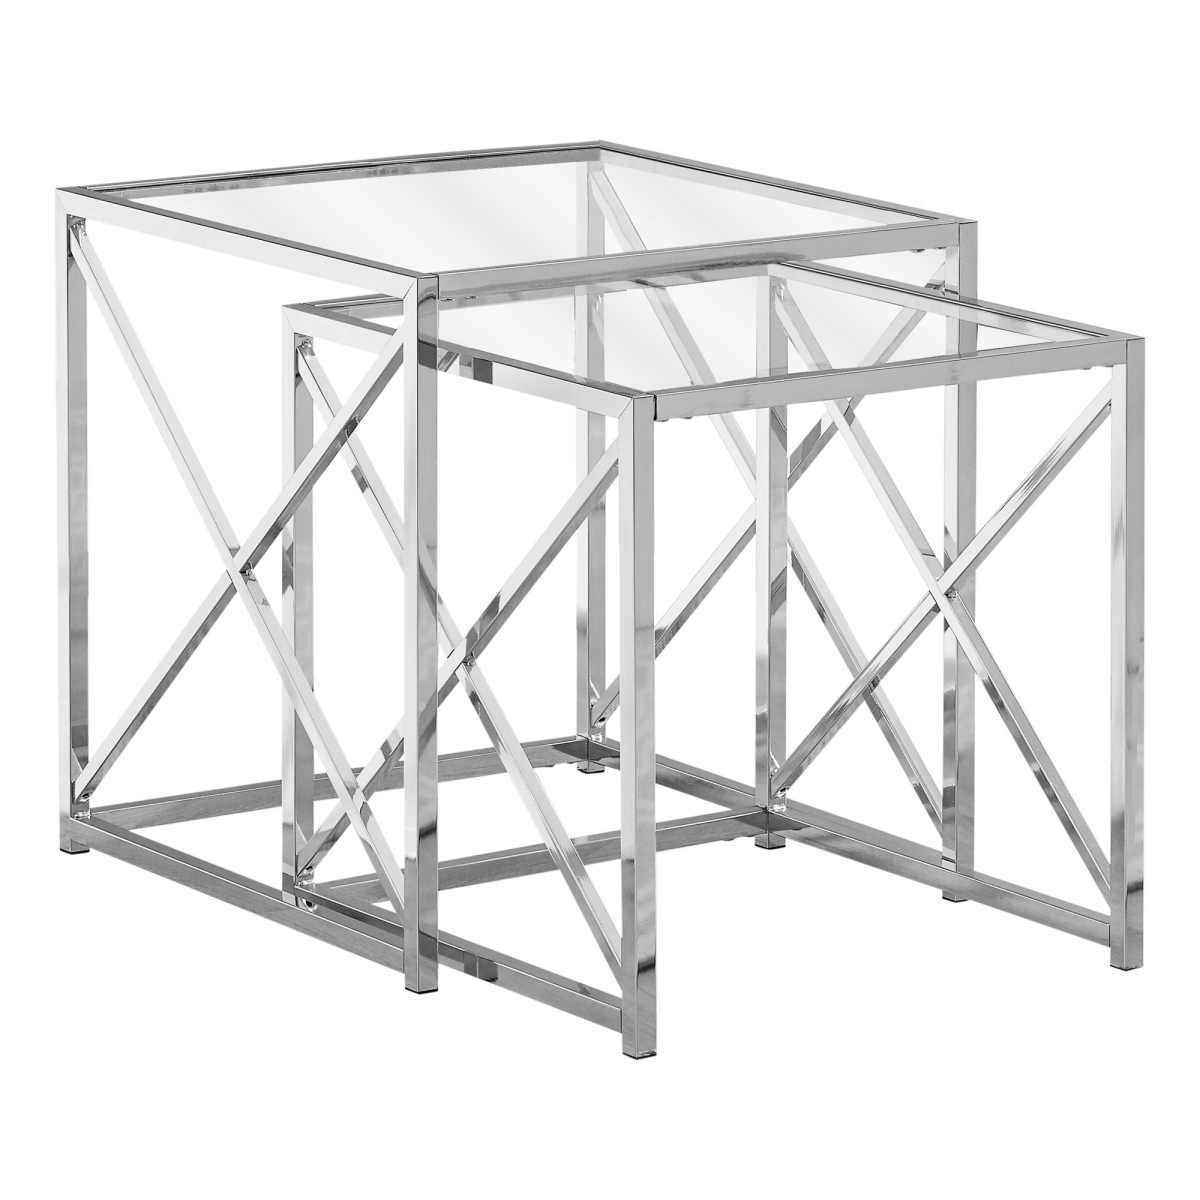 Picture of Monarch Specialties I 3441 Chrome Metal Nesting Table Set with Tempered Glass - 2 Piece